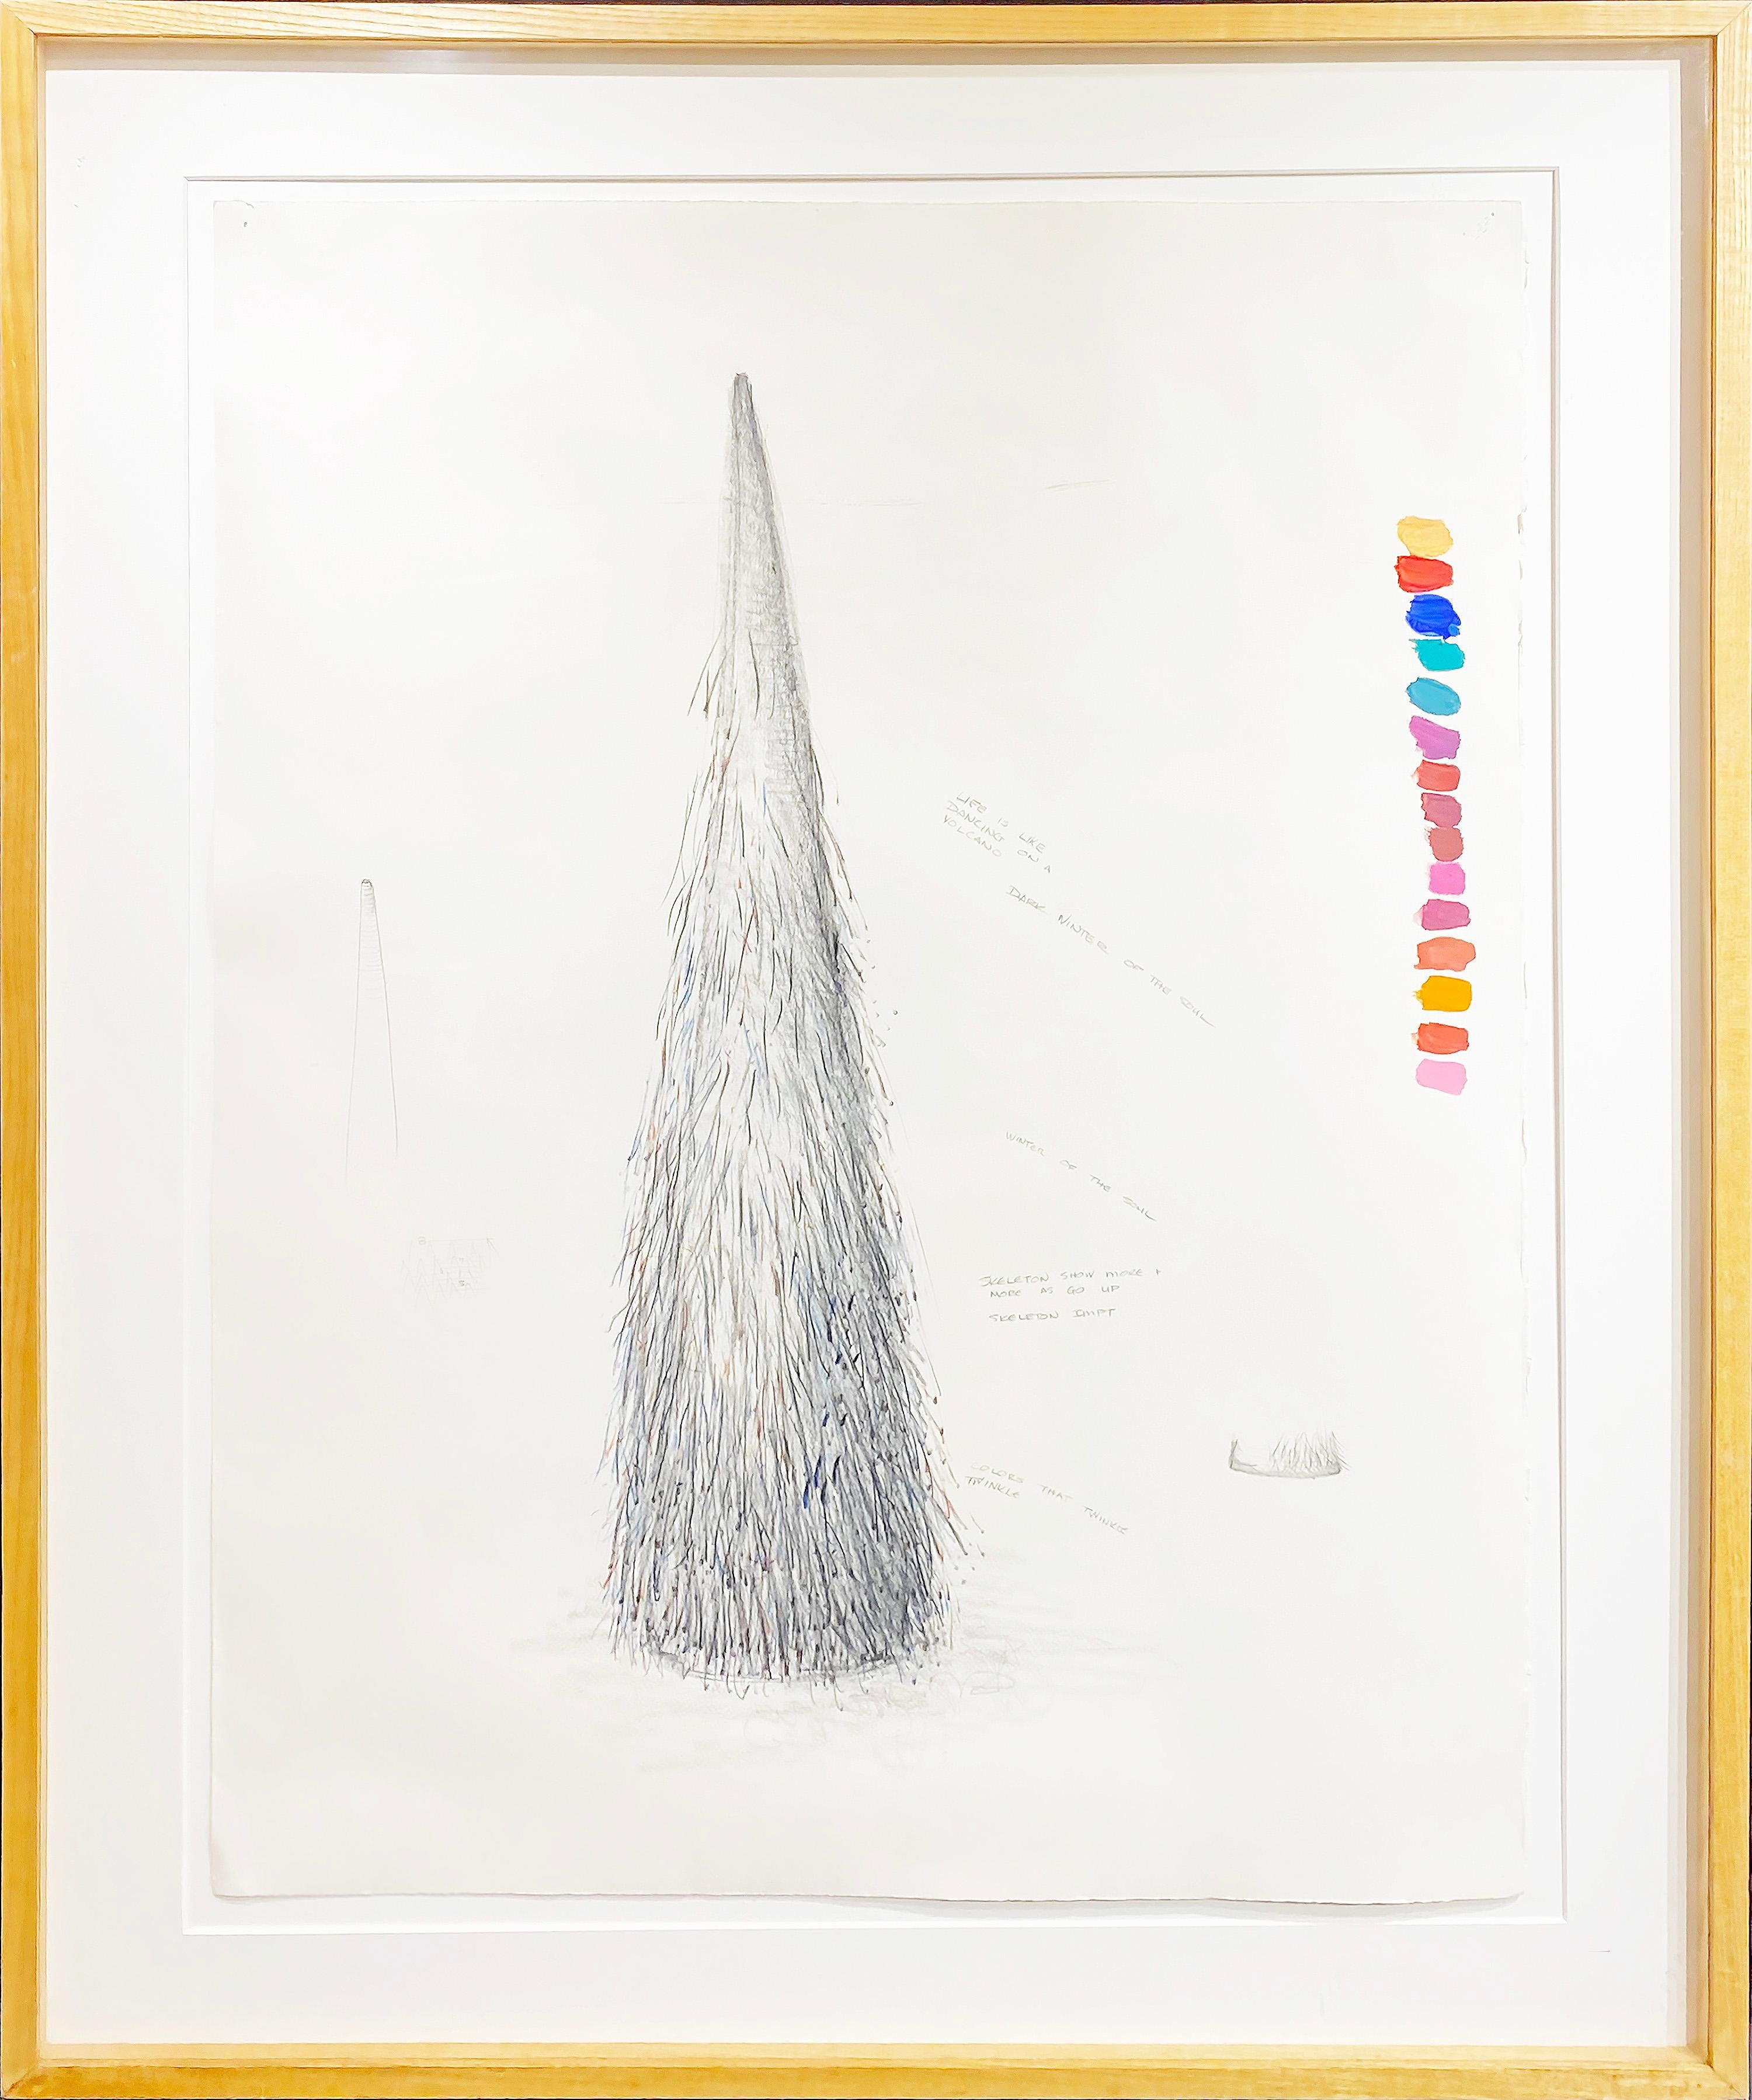 Cone Drawing with Sculpture
By Jane Sauer (b. 1937- )
Cone Drawing Unframed: 30